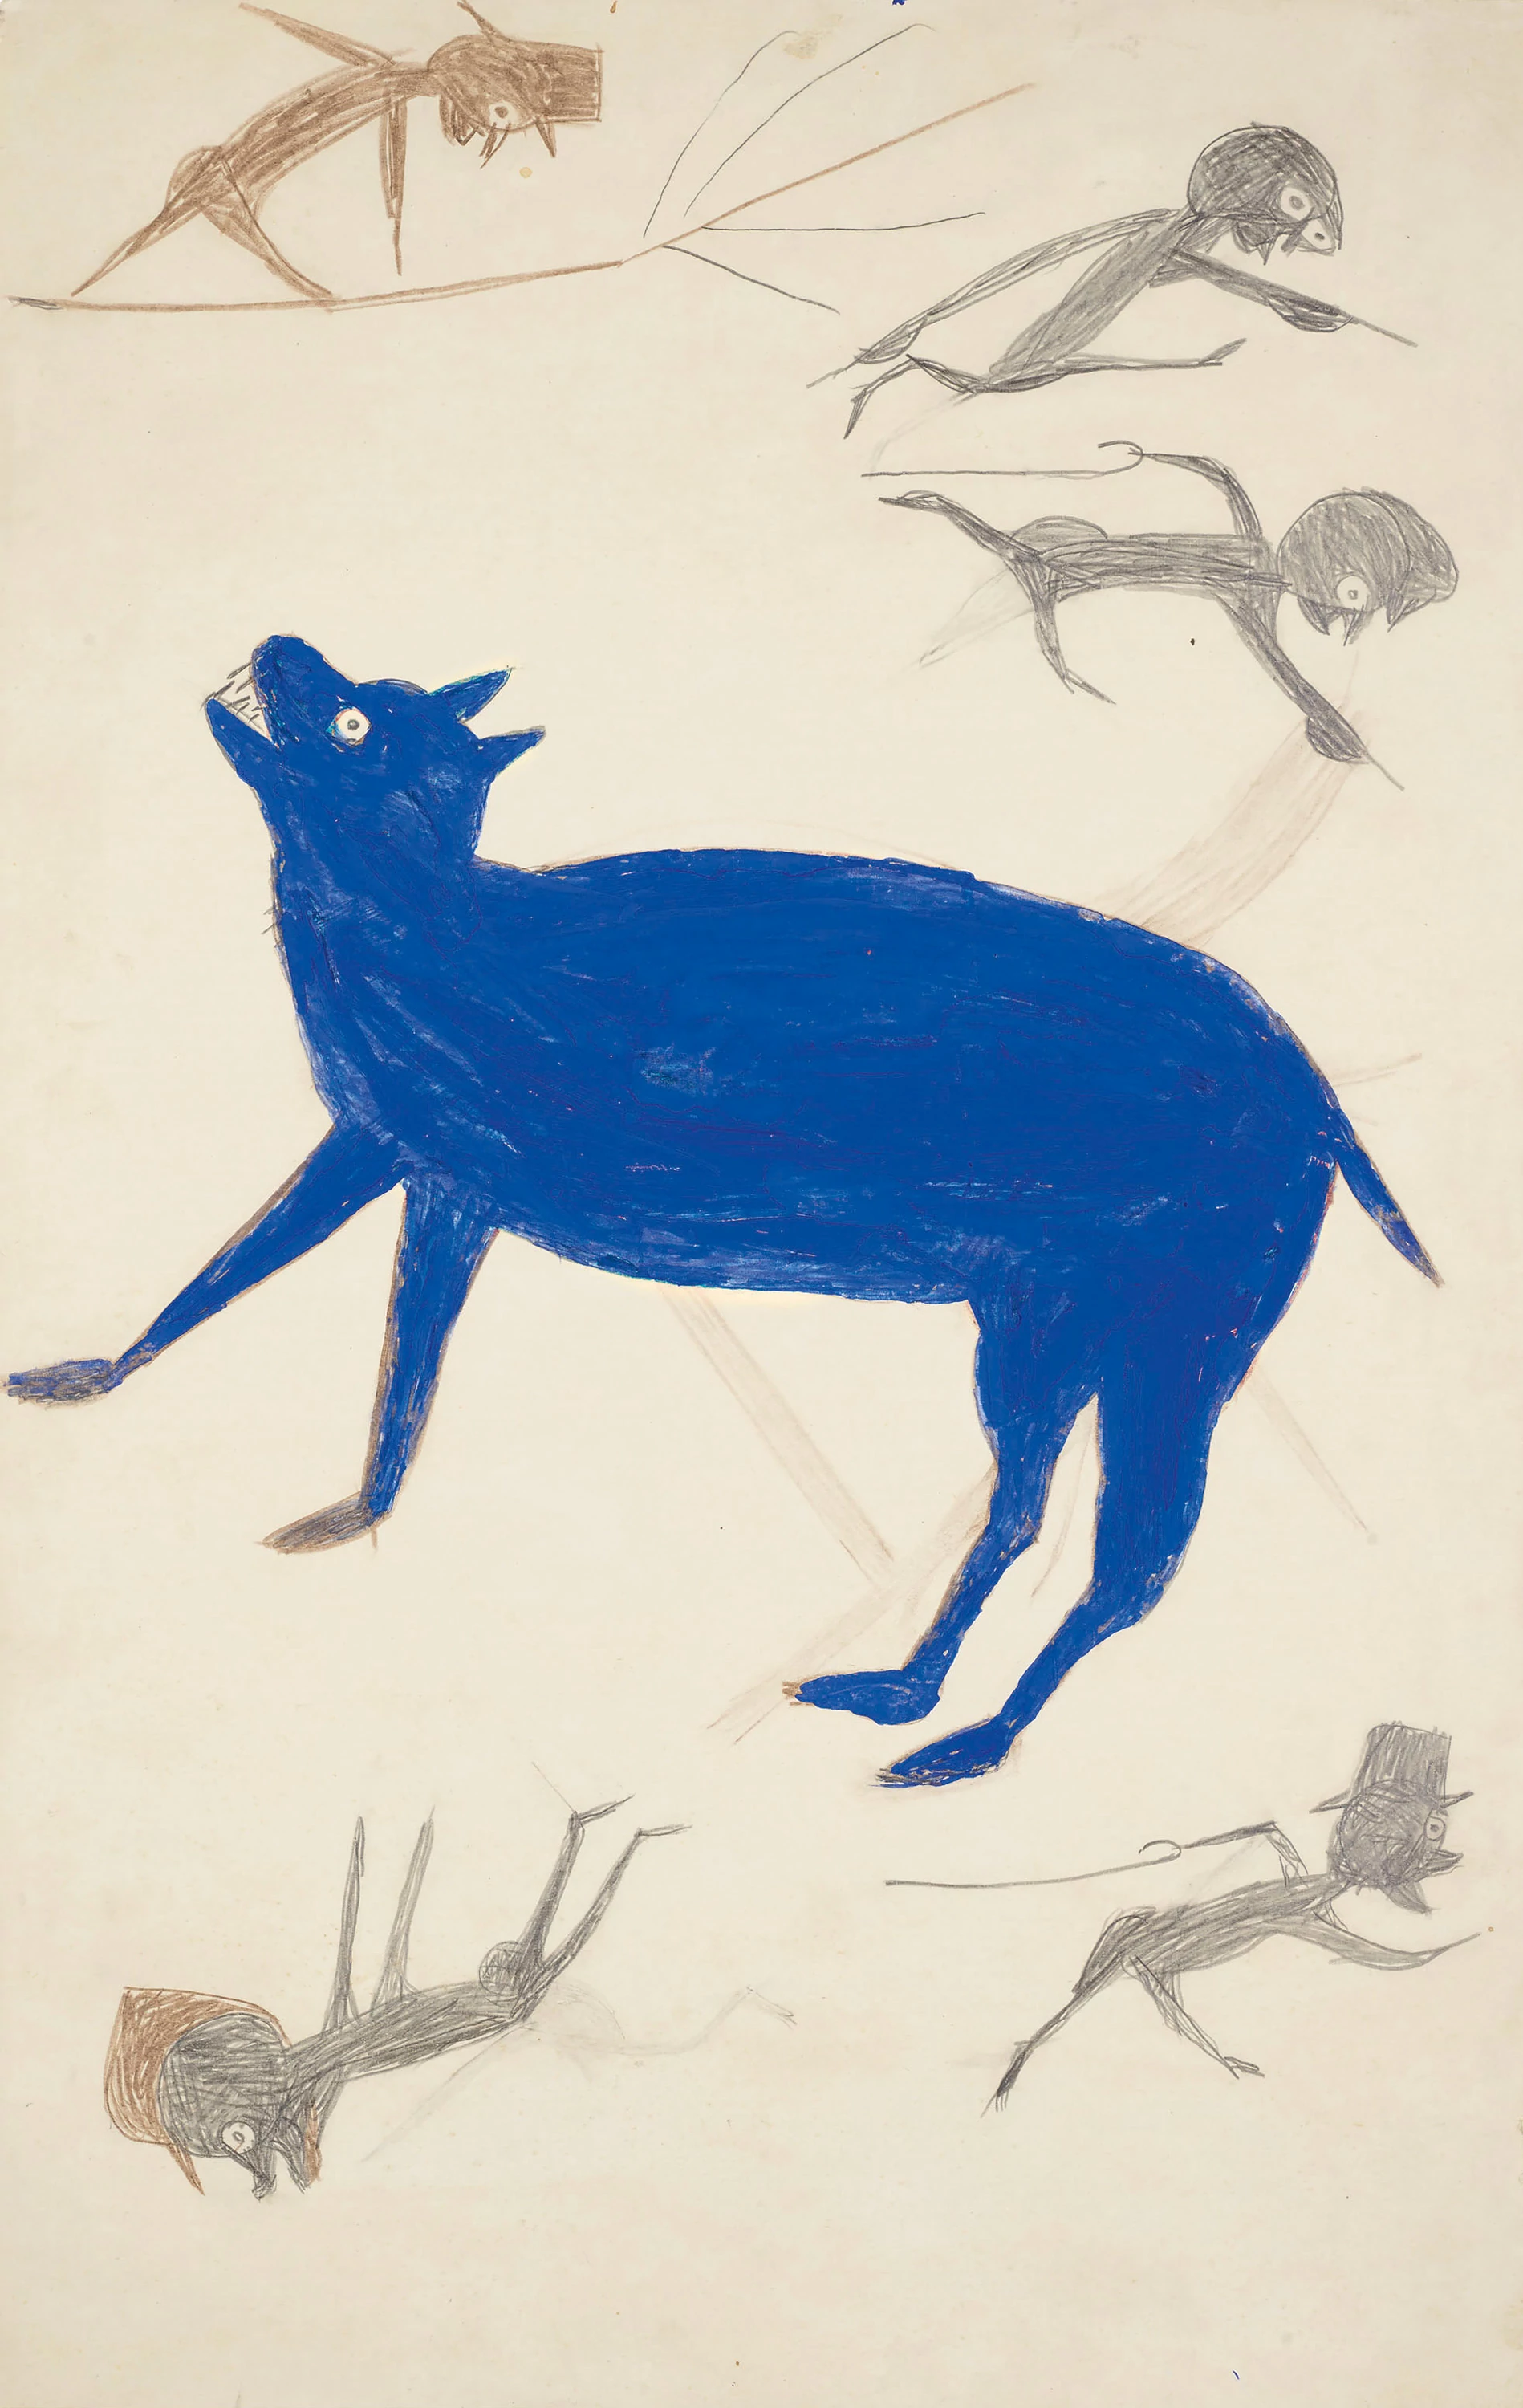 Blue Animal with Five Figures, Bill Traylor